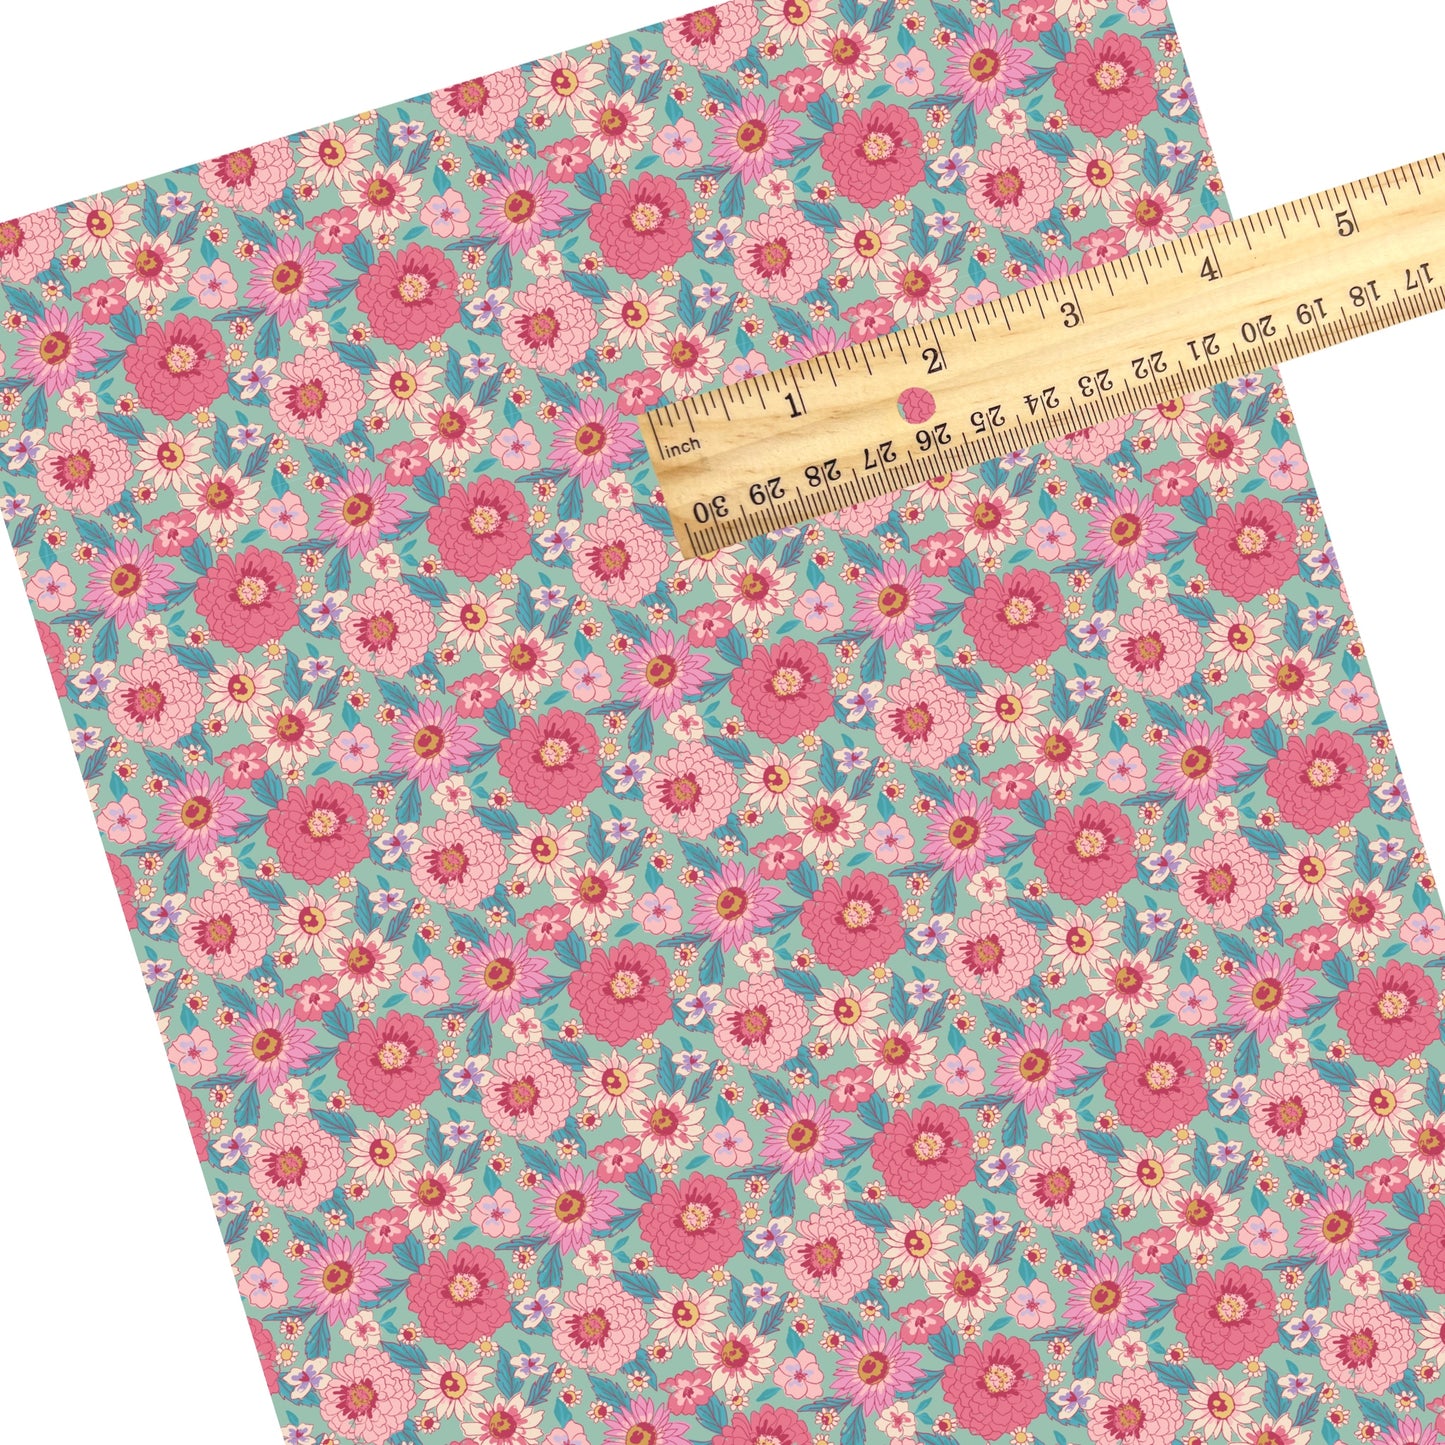 These summer faux leather sheets contain the following design elements: pink flowers on teal. Our CPSIA compliant faux leather sheets or rolls can be used for all types of crafting projects.